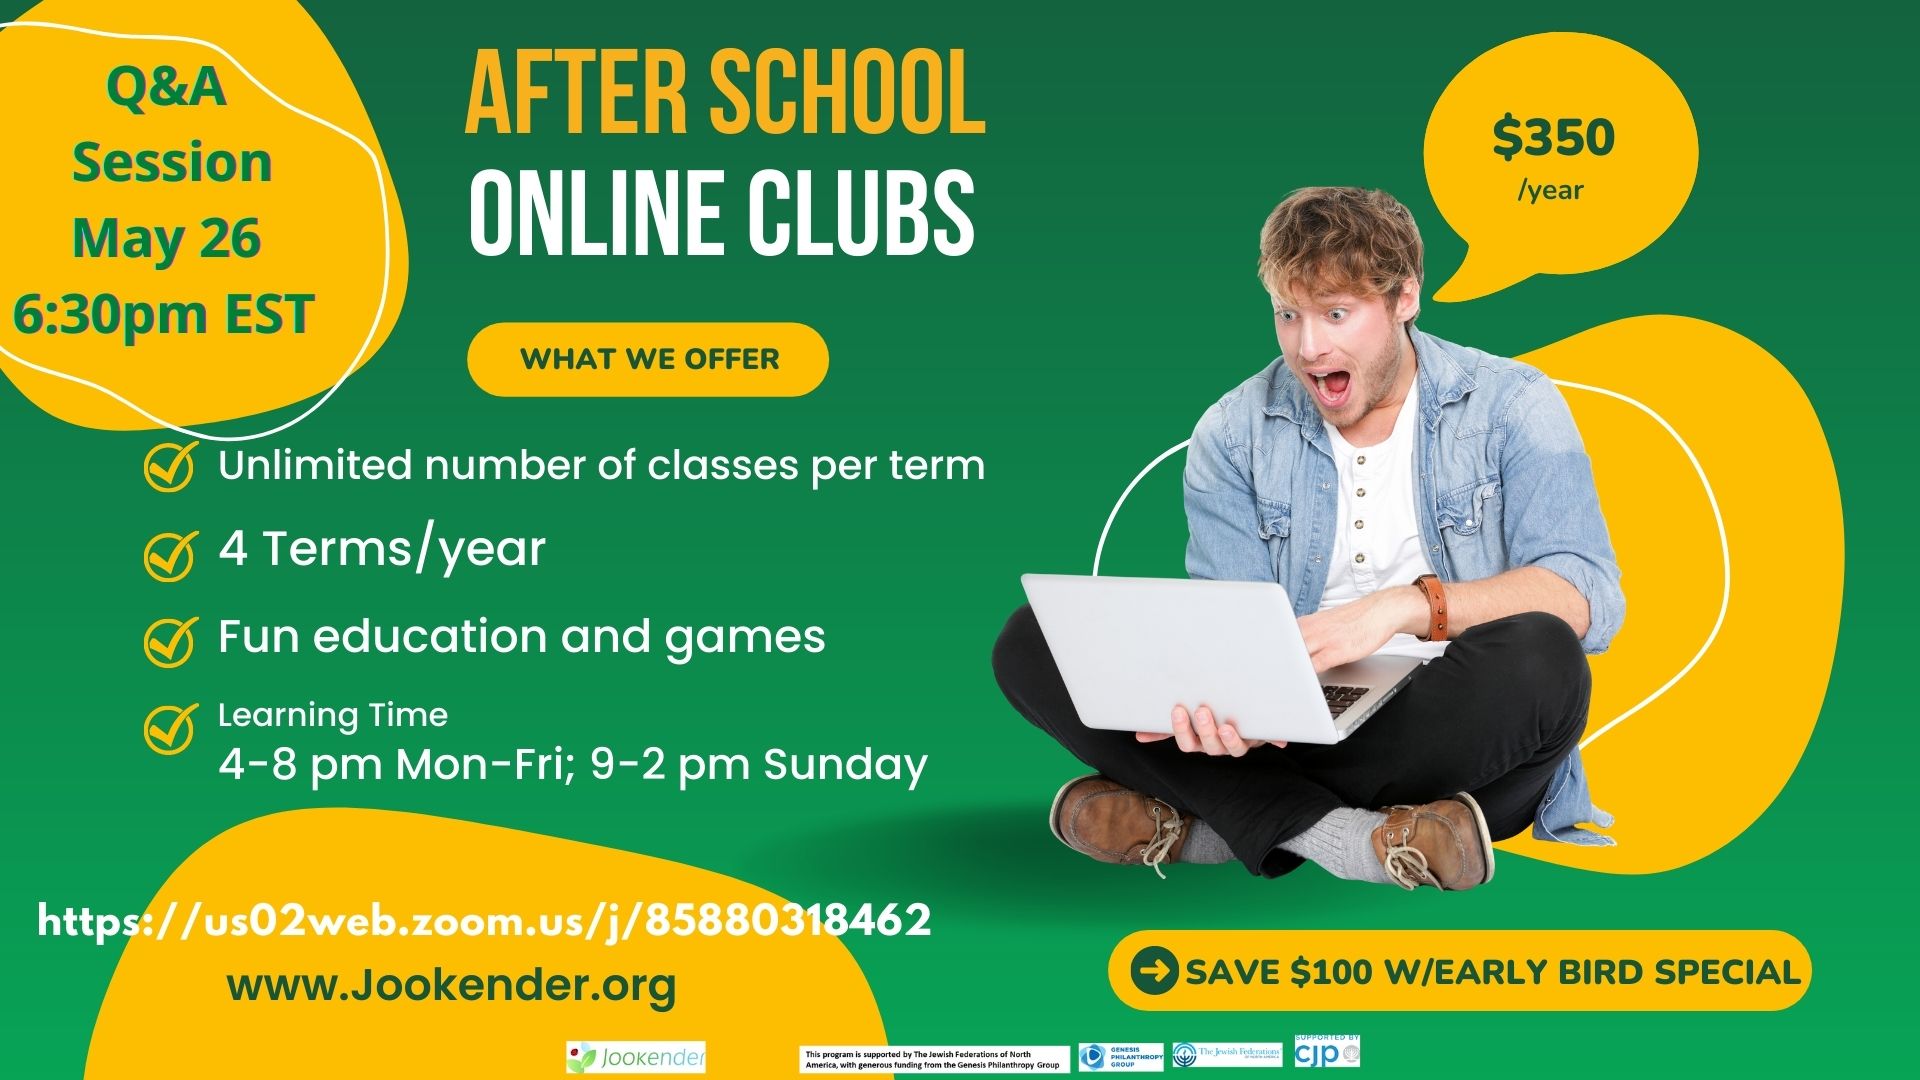 Q&A Session - After School Online Clubs